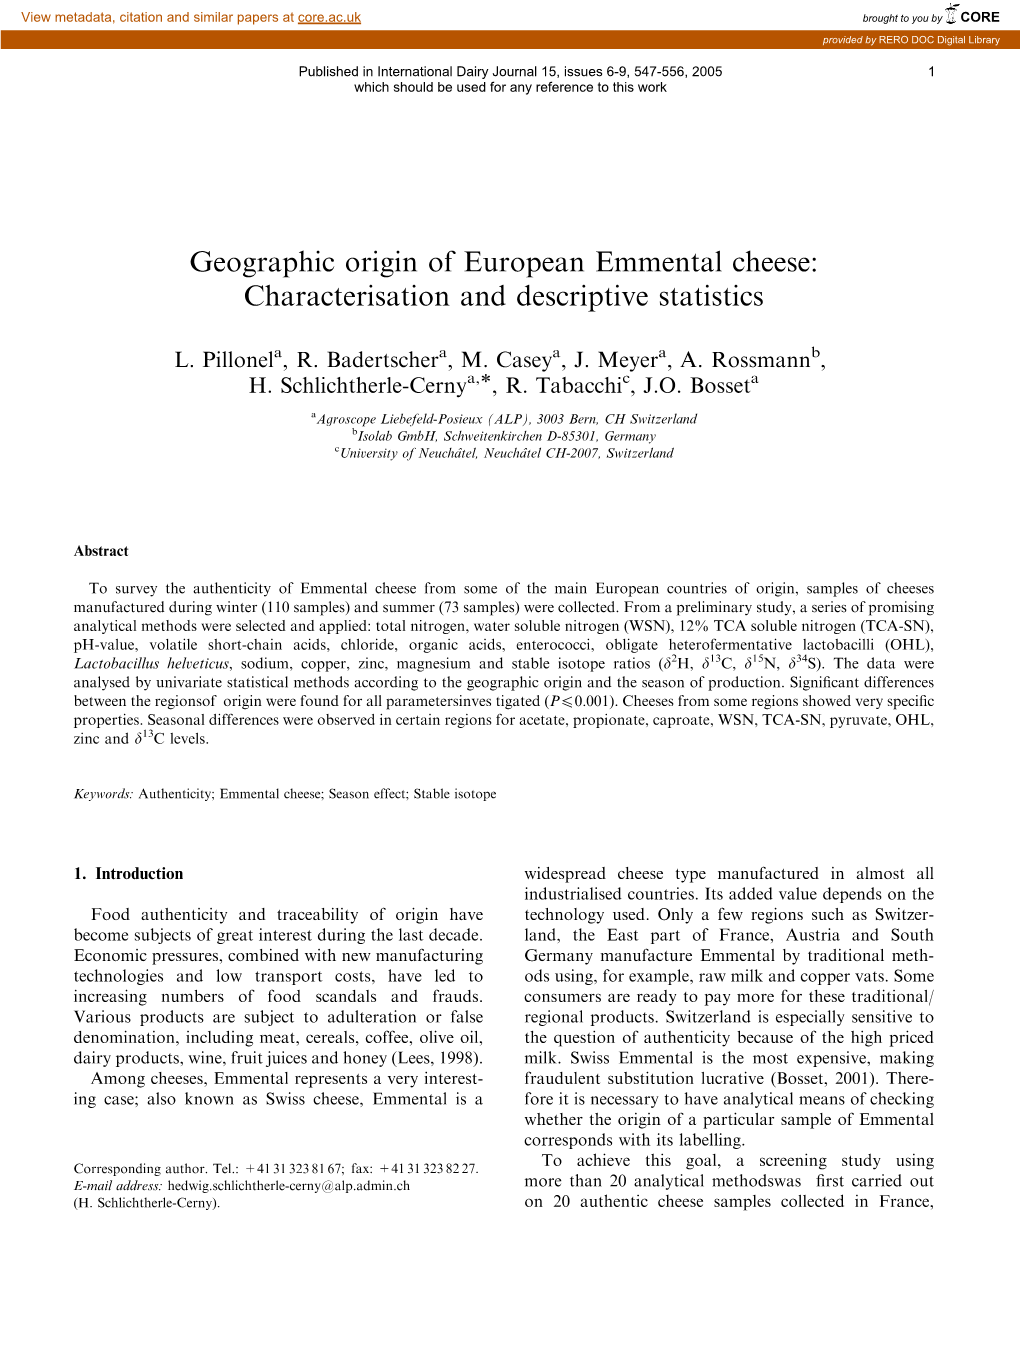 Geographic Origin of European Emmental Cheese: Characterisation and Descriptive Statistics